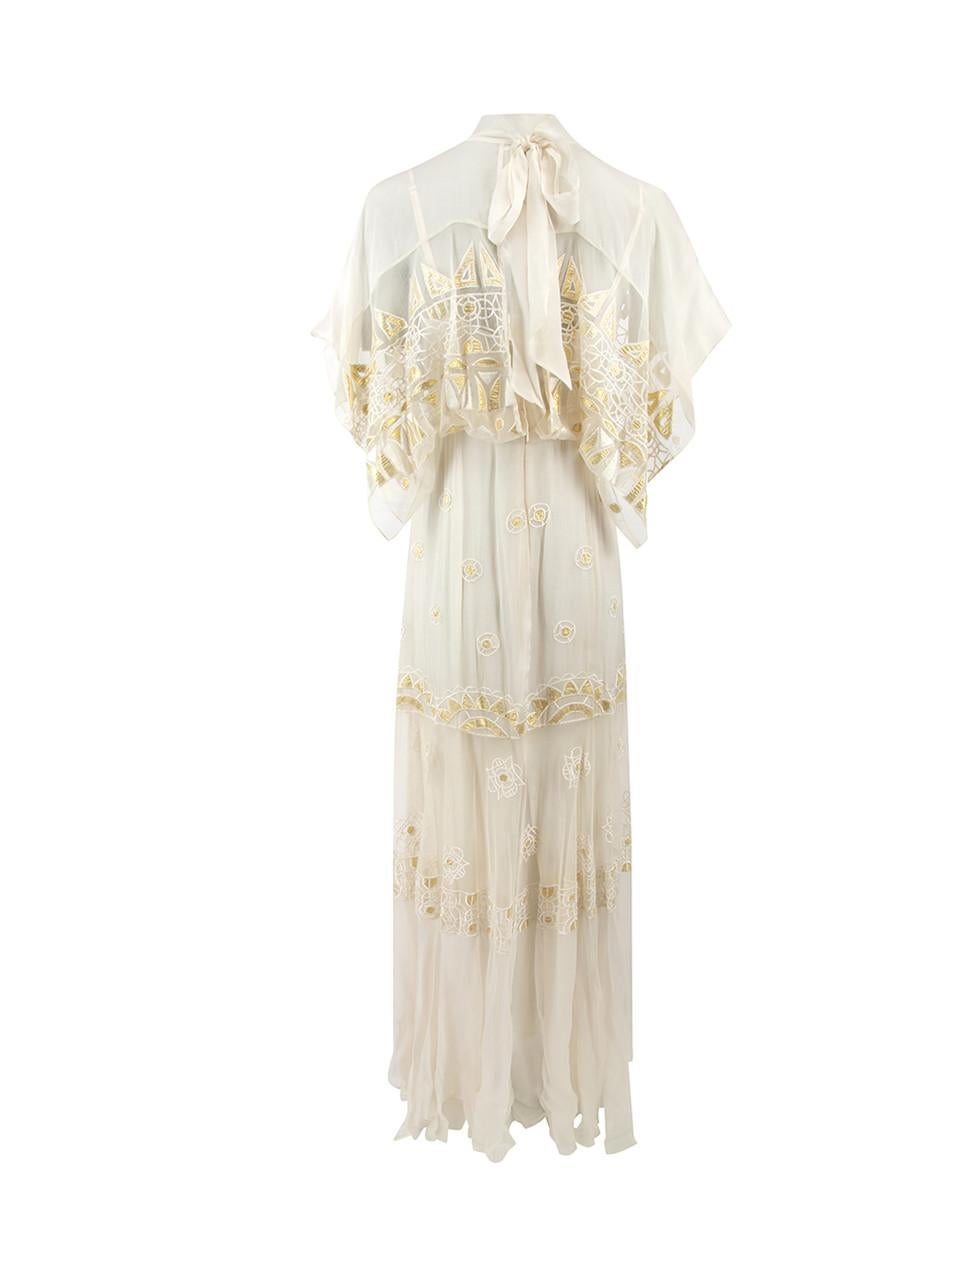 Pre-Loved Temperley London Women's Cream Sheer Panel Embroidered Maxi Dress 1